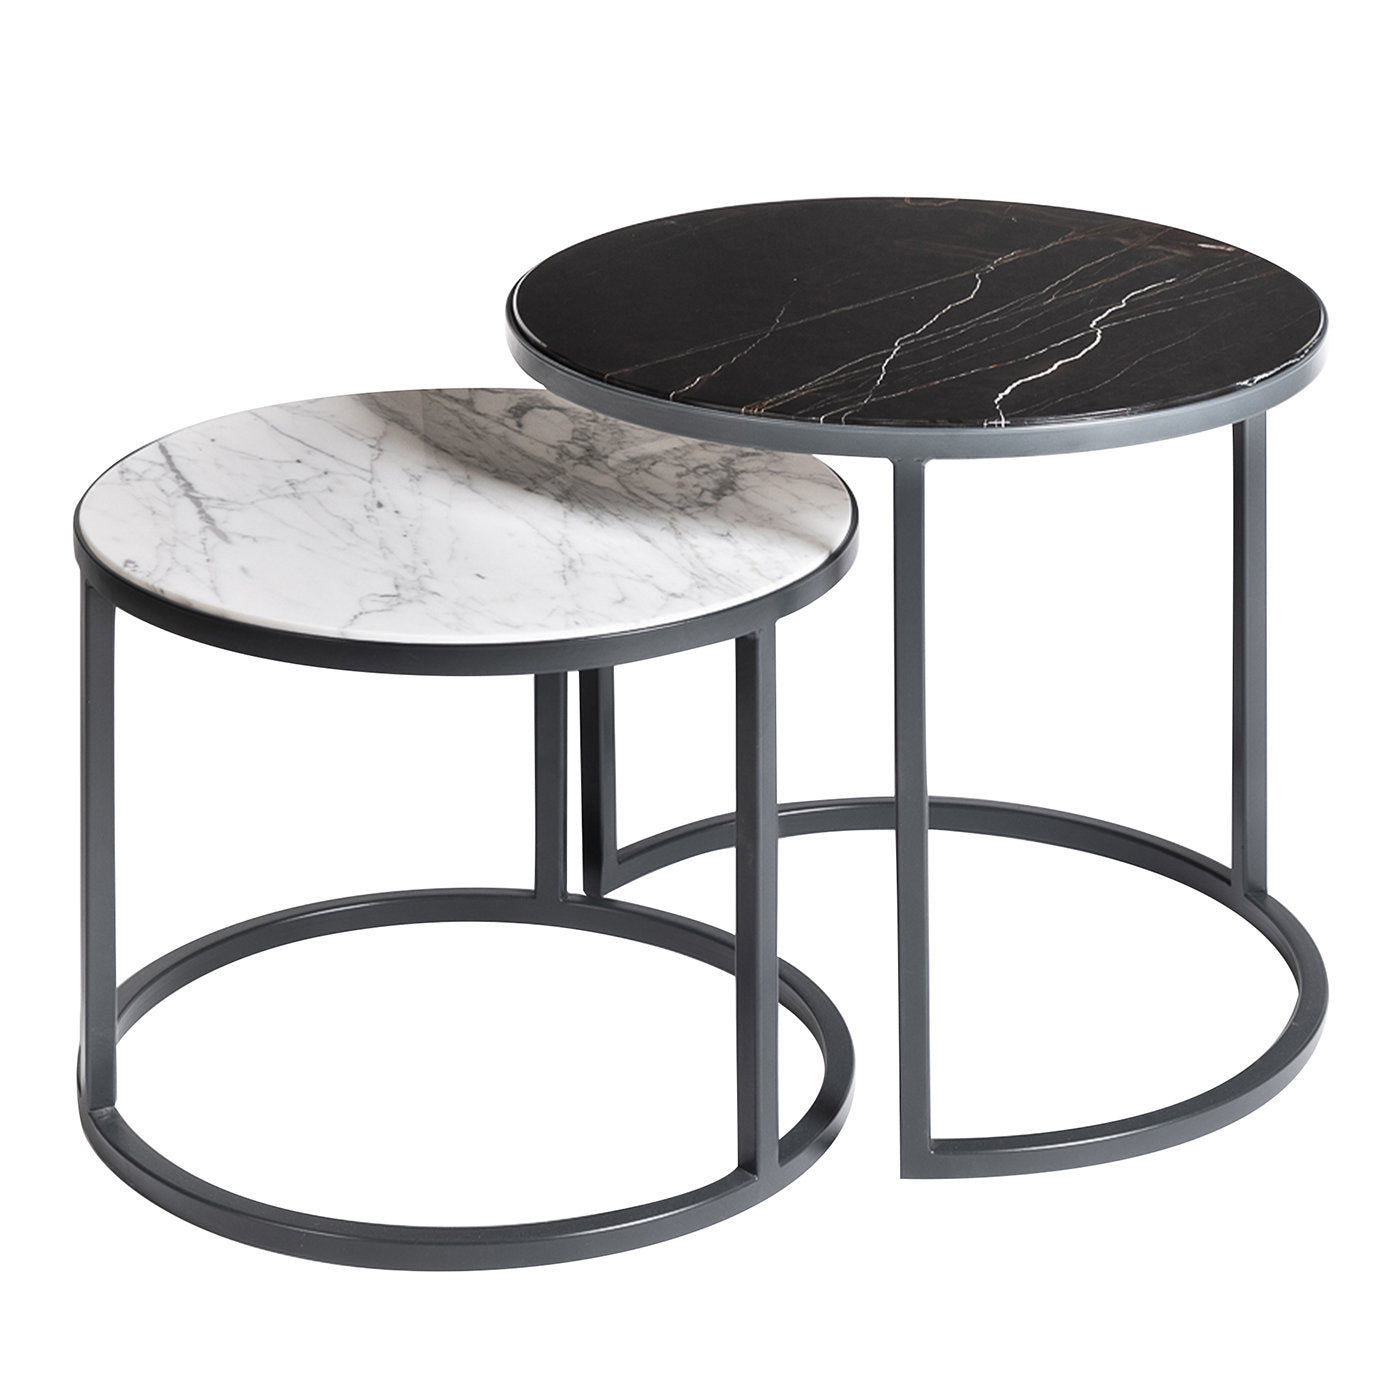 Alicudi and Filicudi Set of 2 Carrara/Marquina Round Coffee Tables  - Alternative view 1